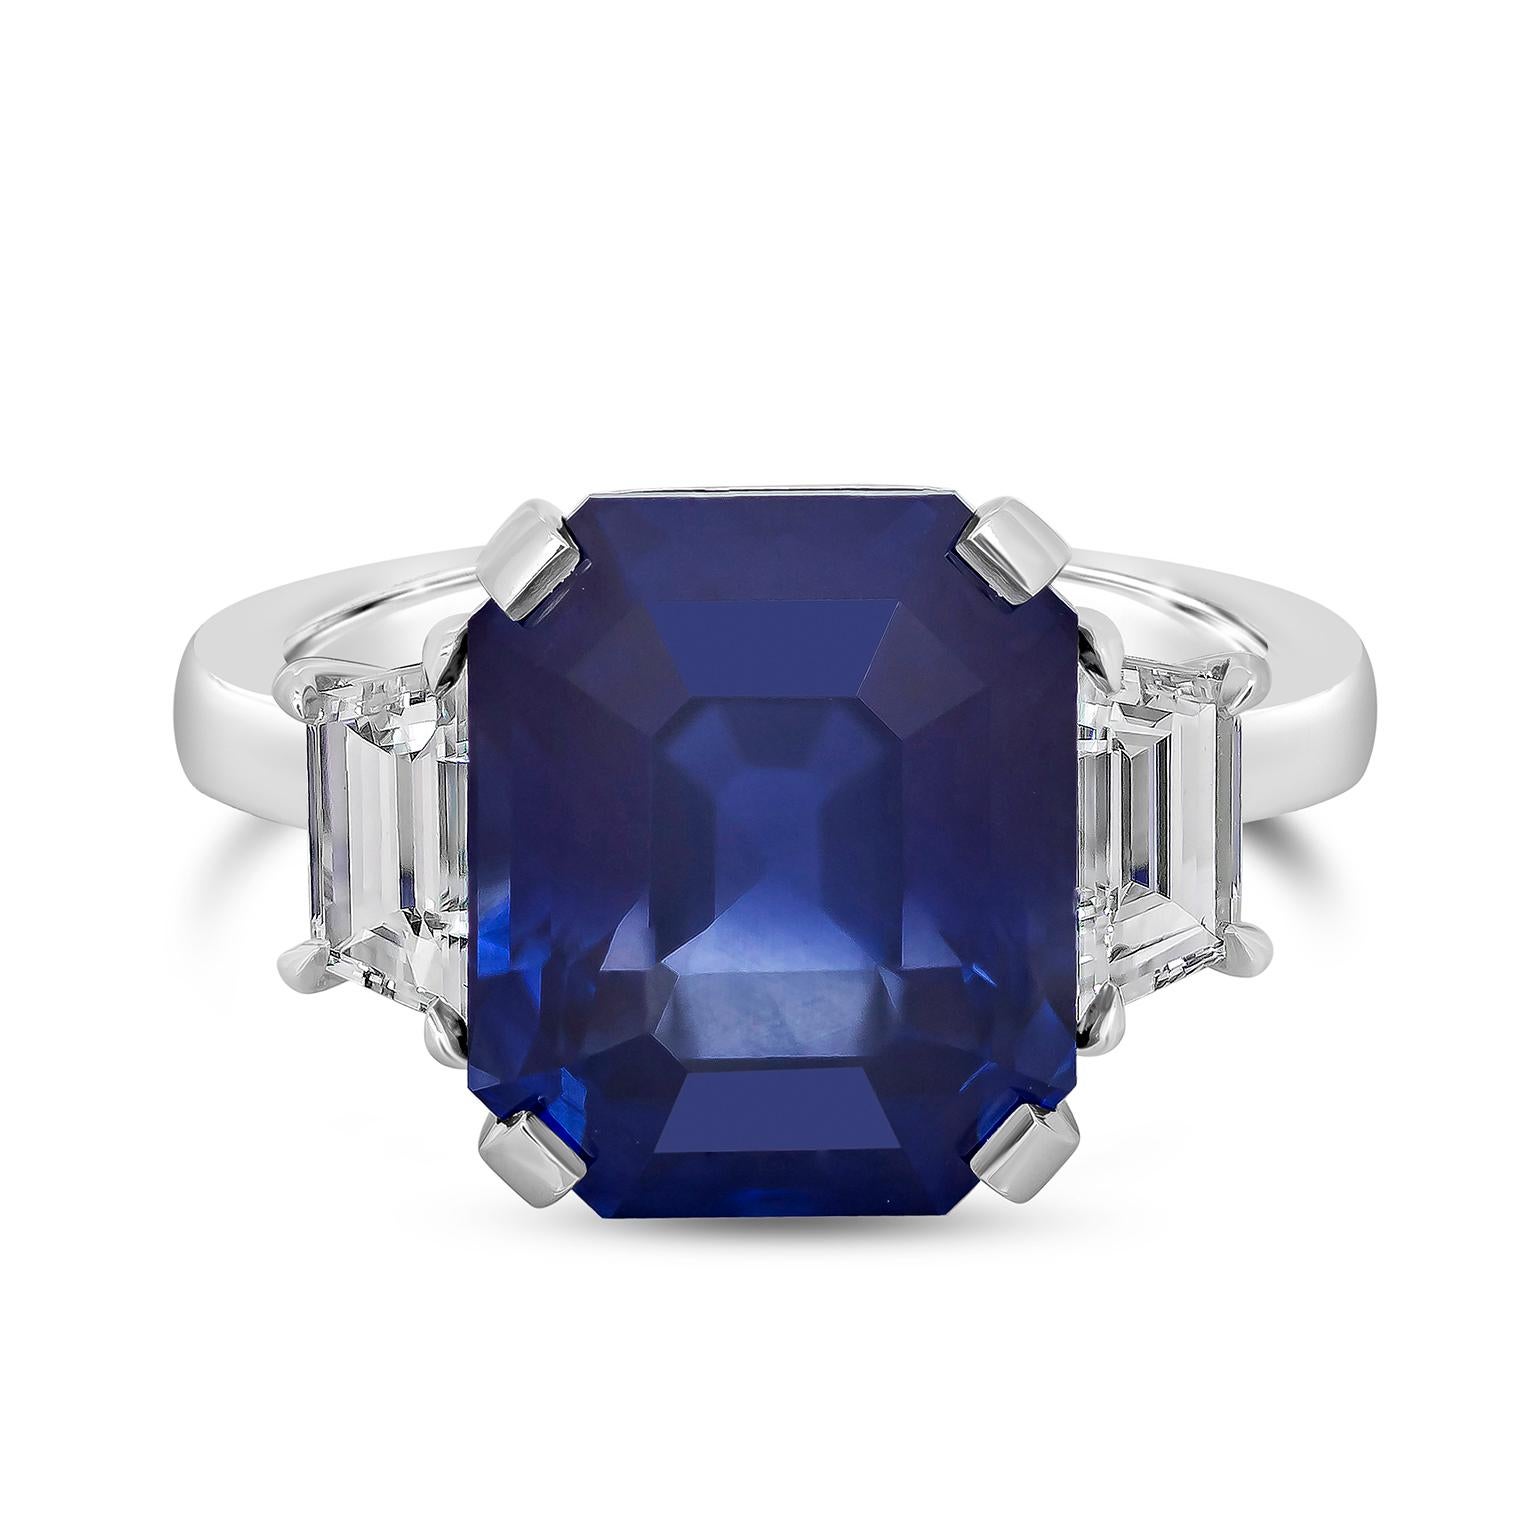 Showcasing an 8.99 carat GIA certified emerald cut blue sapphire, flanked by step-cut trapezoid diamonds, set in a polished platinum mounting. Accent diamonds are 0.76 carats total and are approximately E color, VS clarity. 

Style available in